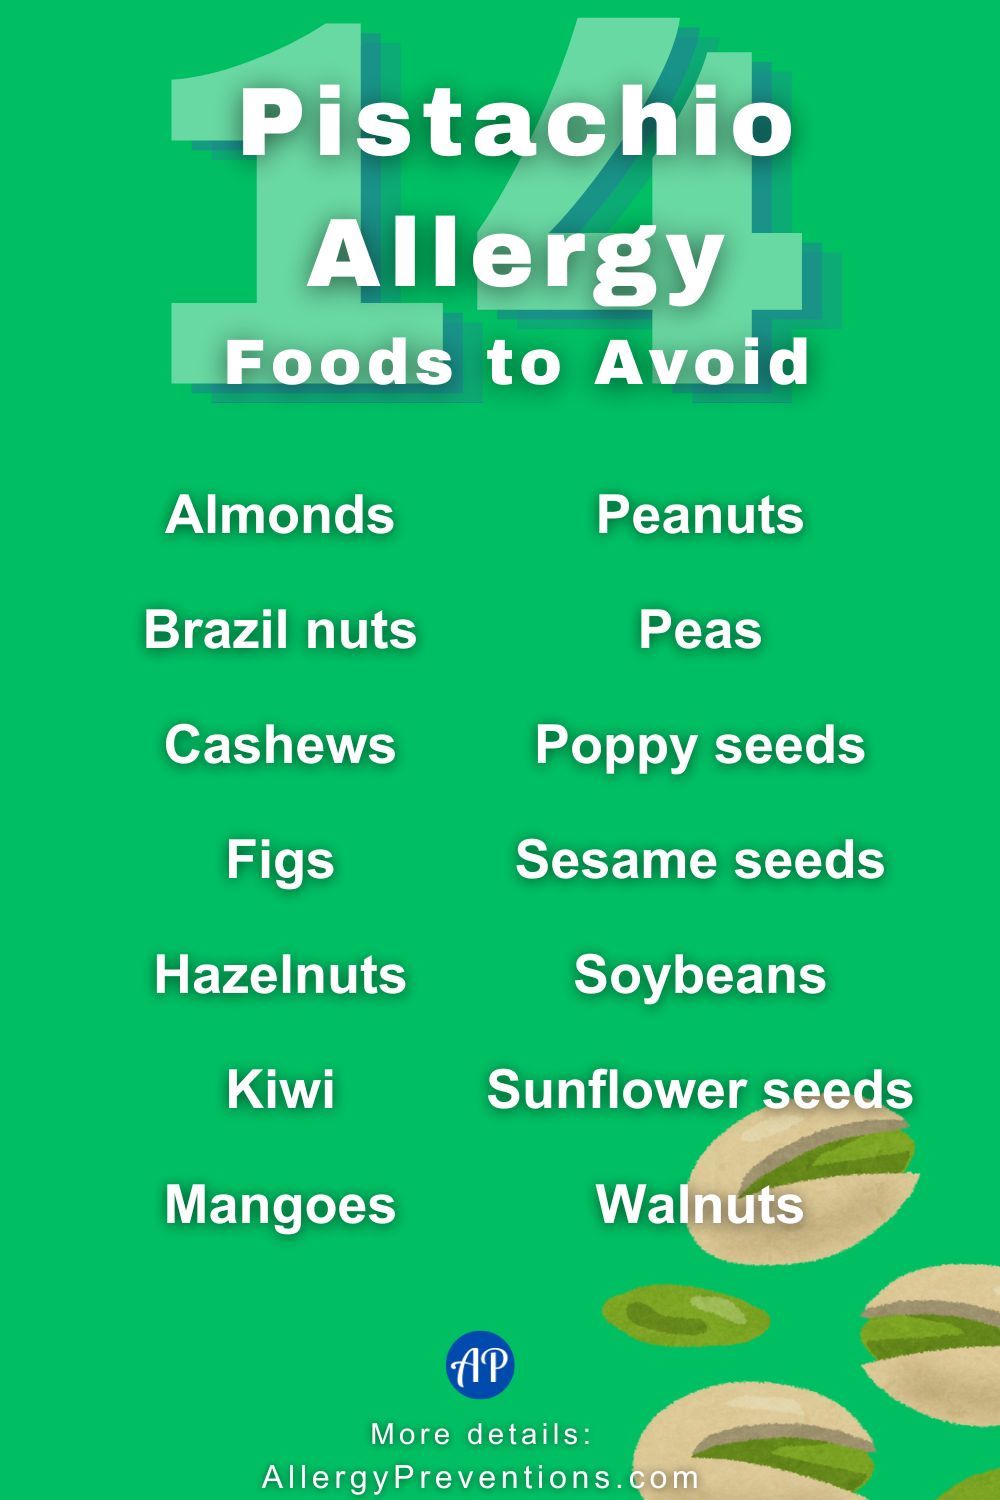 Pistachio Allergy Foods to avoid infographic. The foods to avoid with an allergy to pistachios are: Almonds, Brazil nuts, Cashews, Figs, Hazelnuts, Kiwi, Mangoes, Peanuts, Peas, Poppy seeds, Sesame seeds, Soybeans, Sunflower seeds, and Walnuts.